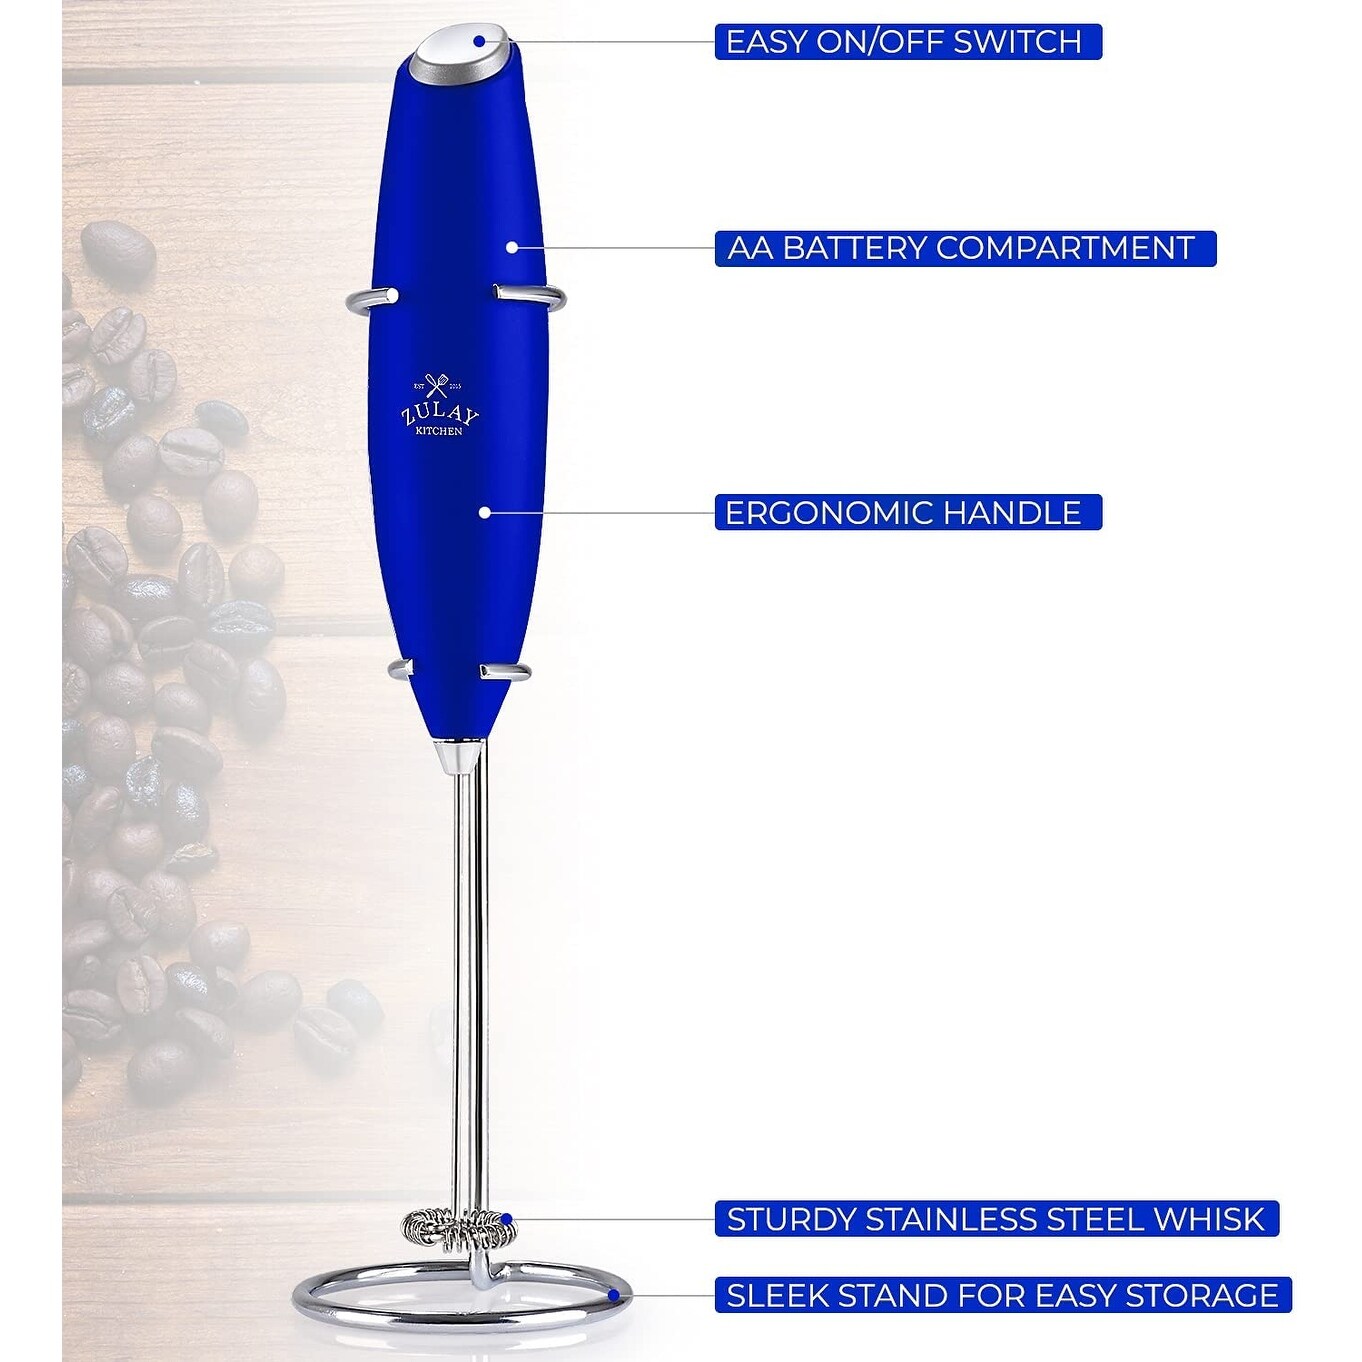 Zulay ZK Milk Frother OG with Stand - 20263286